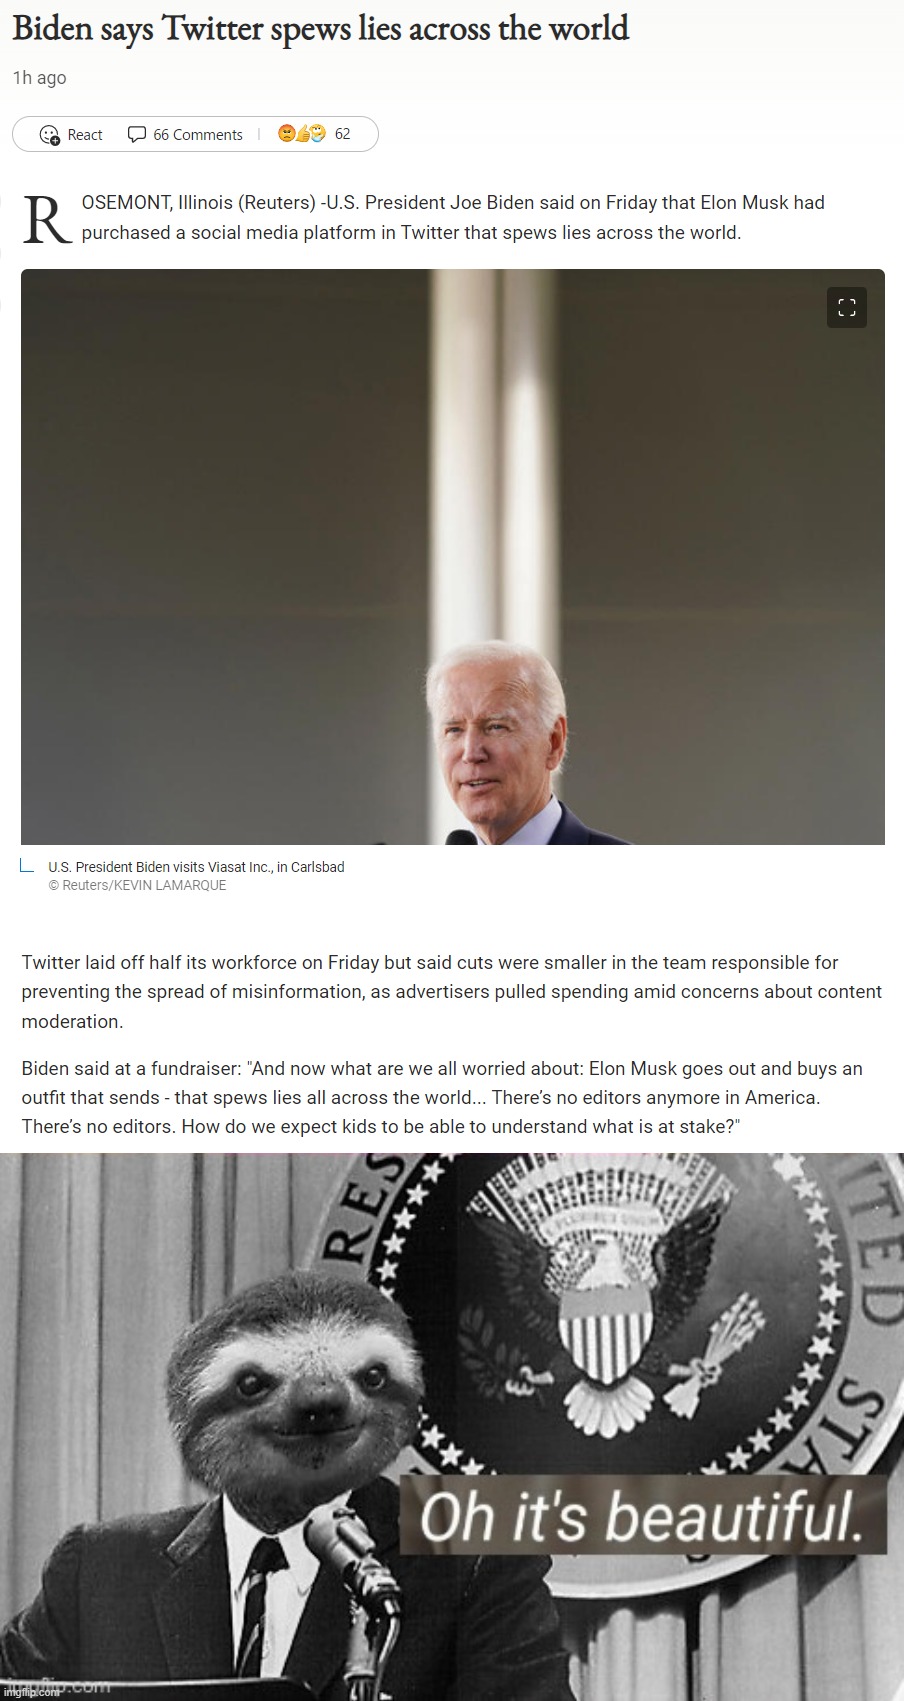 He did it. He actually said it. Yes, more of this please. | image tagged in biden says twitter spews lies,president sloth oh it s beautiful,joe biden,twitter,elon musk,social media | made w/ Imgflip meme maker